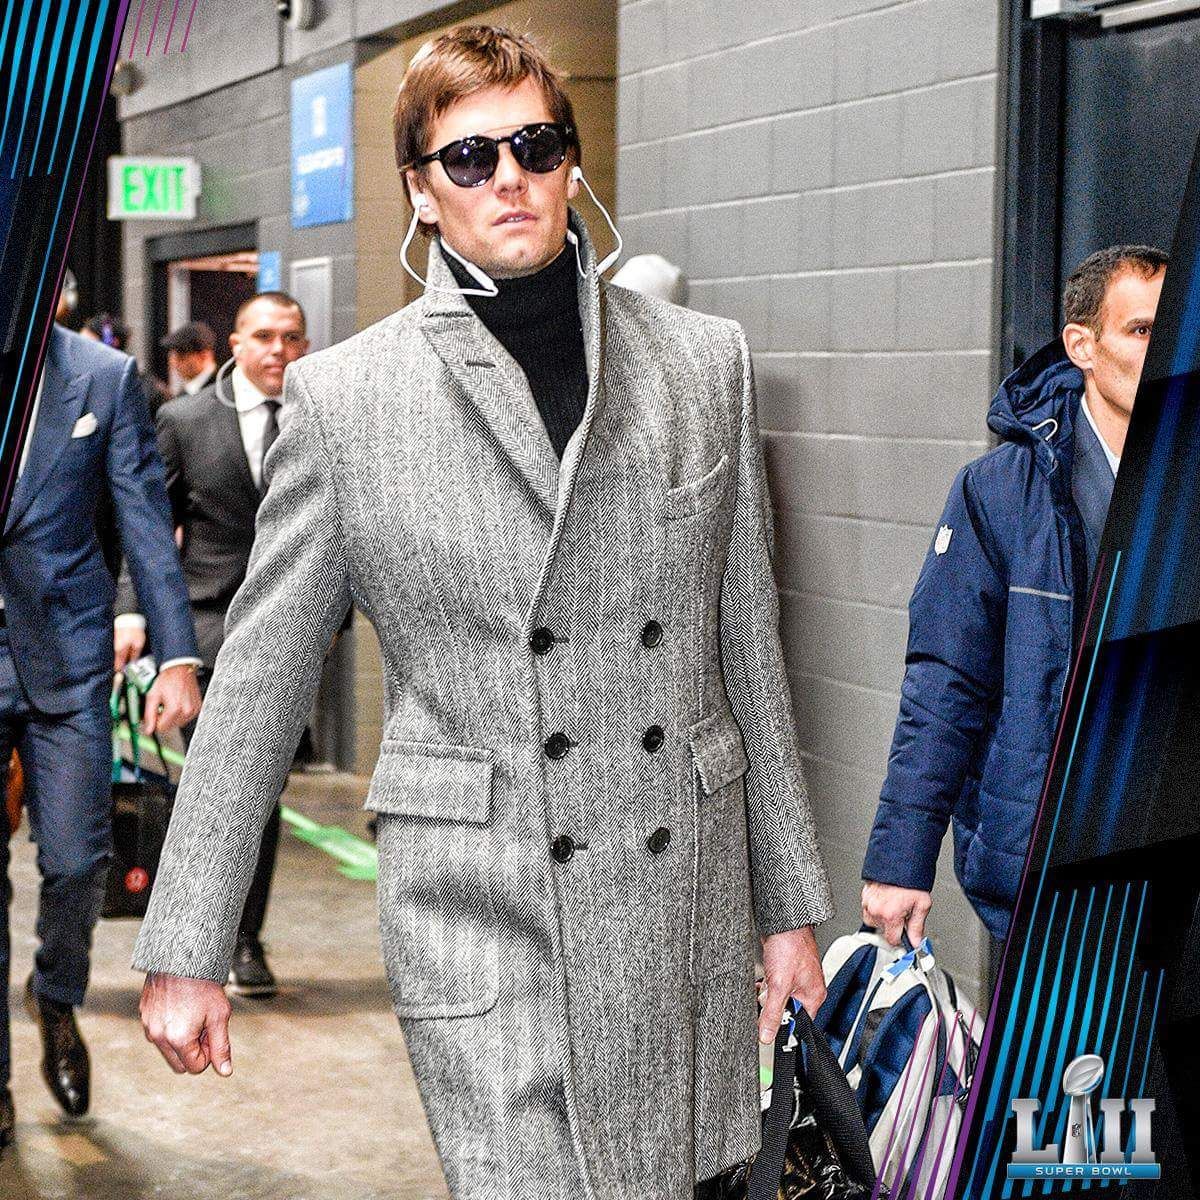 Tom Brady looks like a single, divorced mother that just won full custody of her kids and is leaving the courtroom.